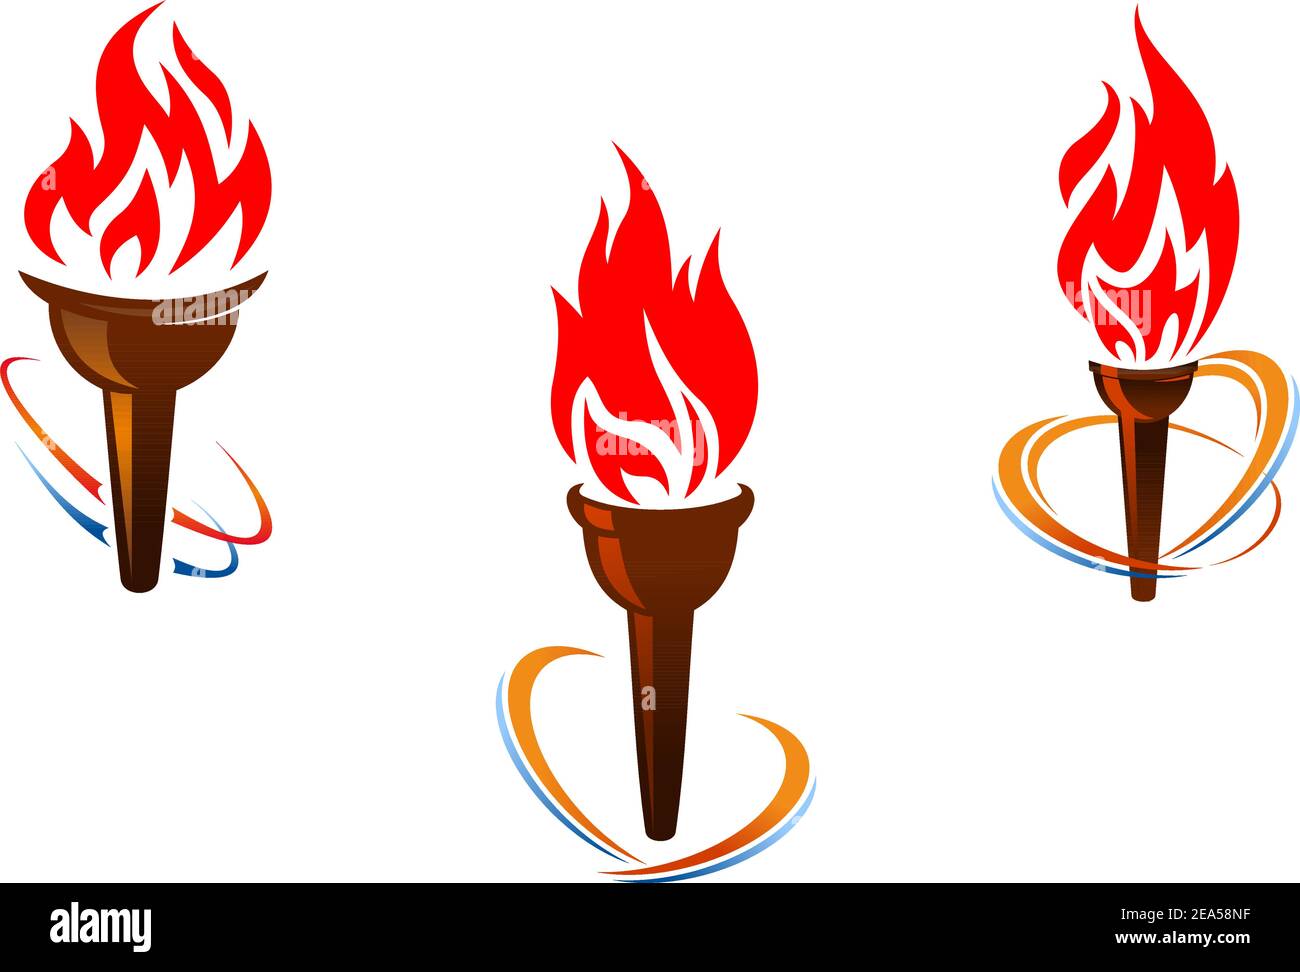 Three torches with fire flames for sports or peace concept design Stock Vector